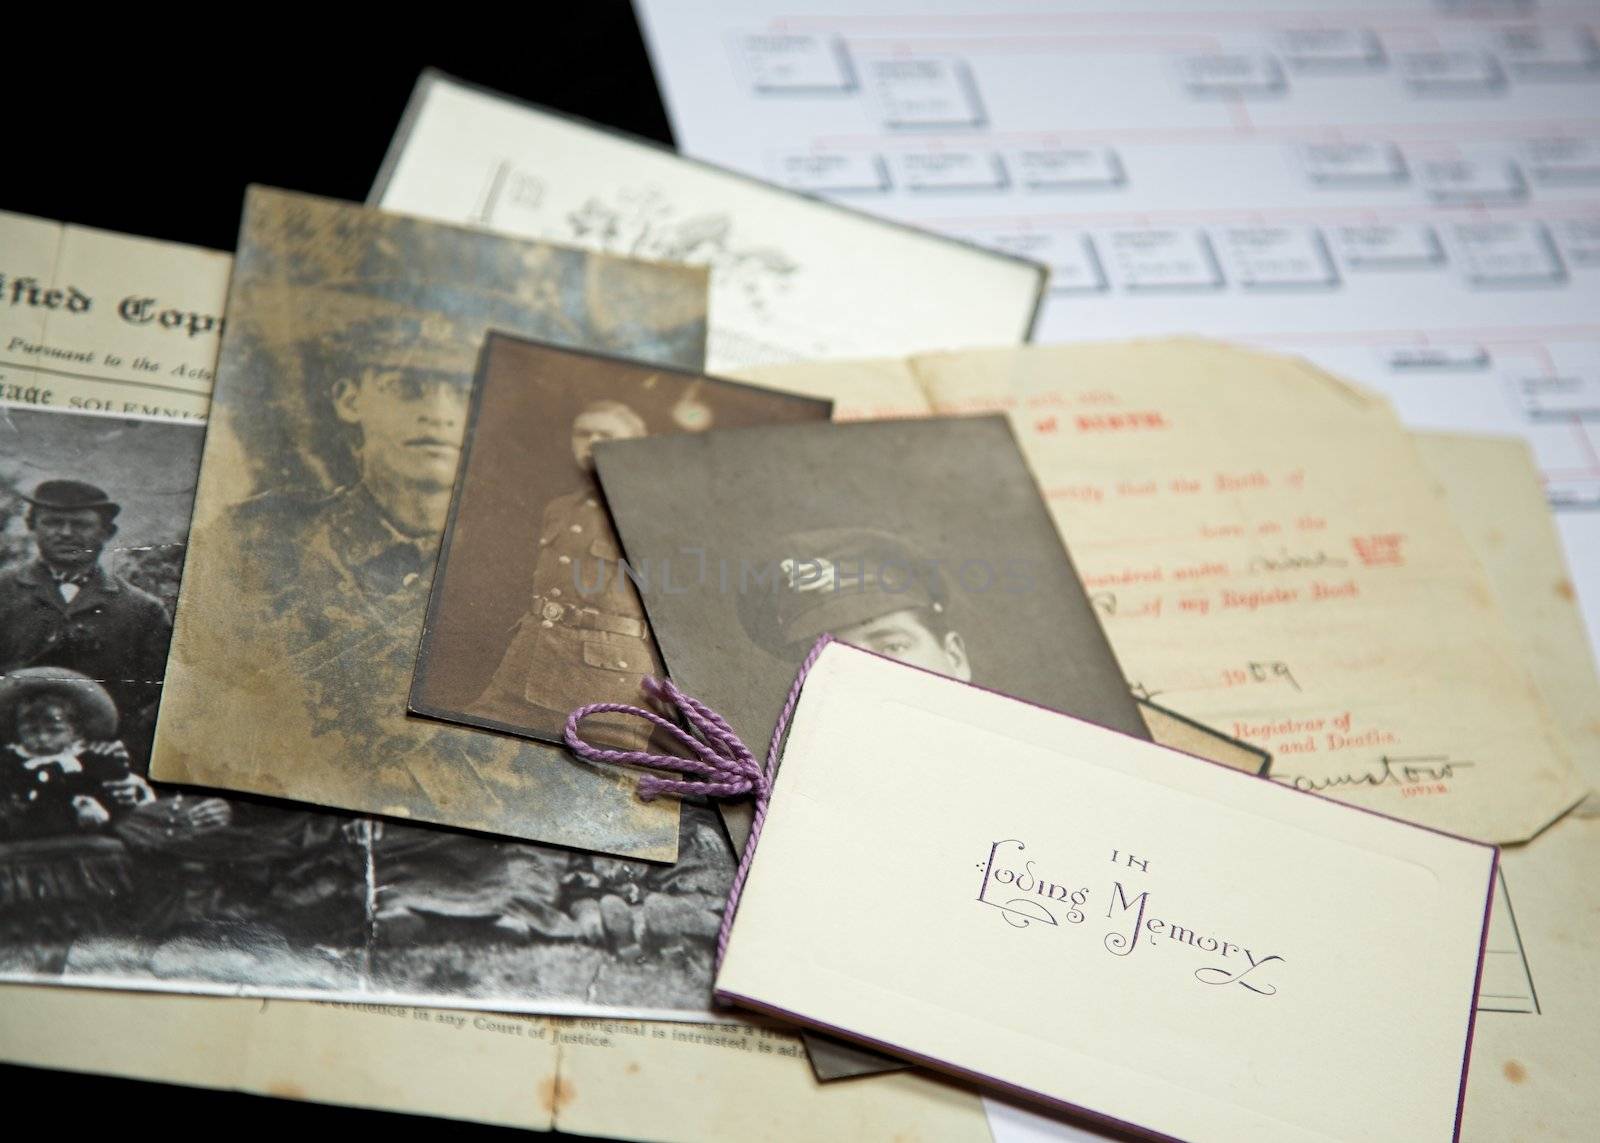 A selection of old photographs, certificates and In Memoriam cards